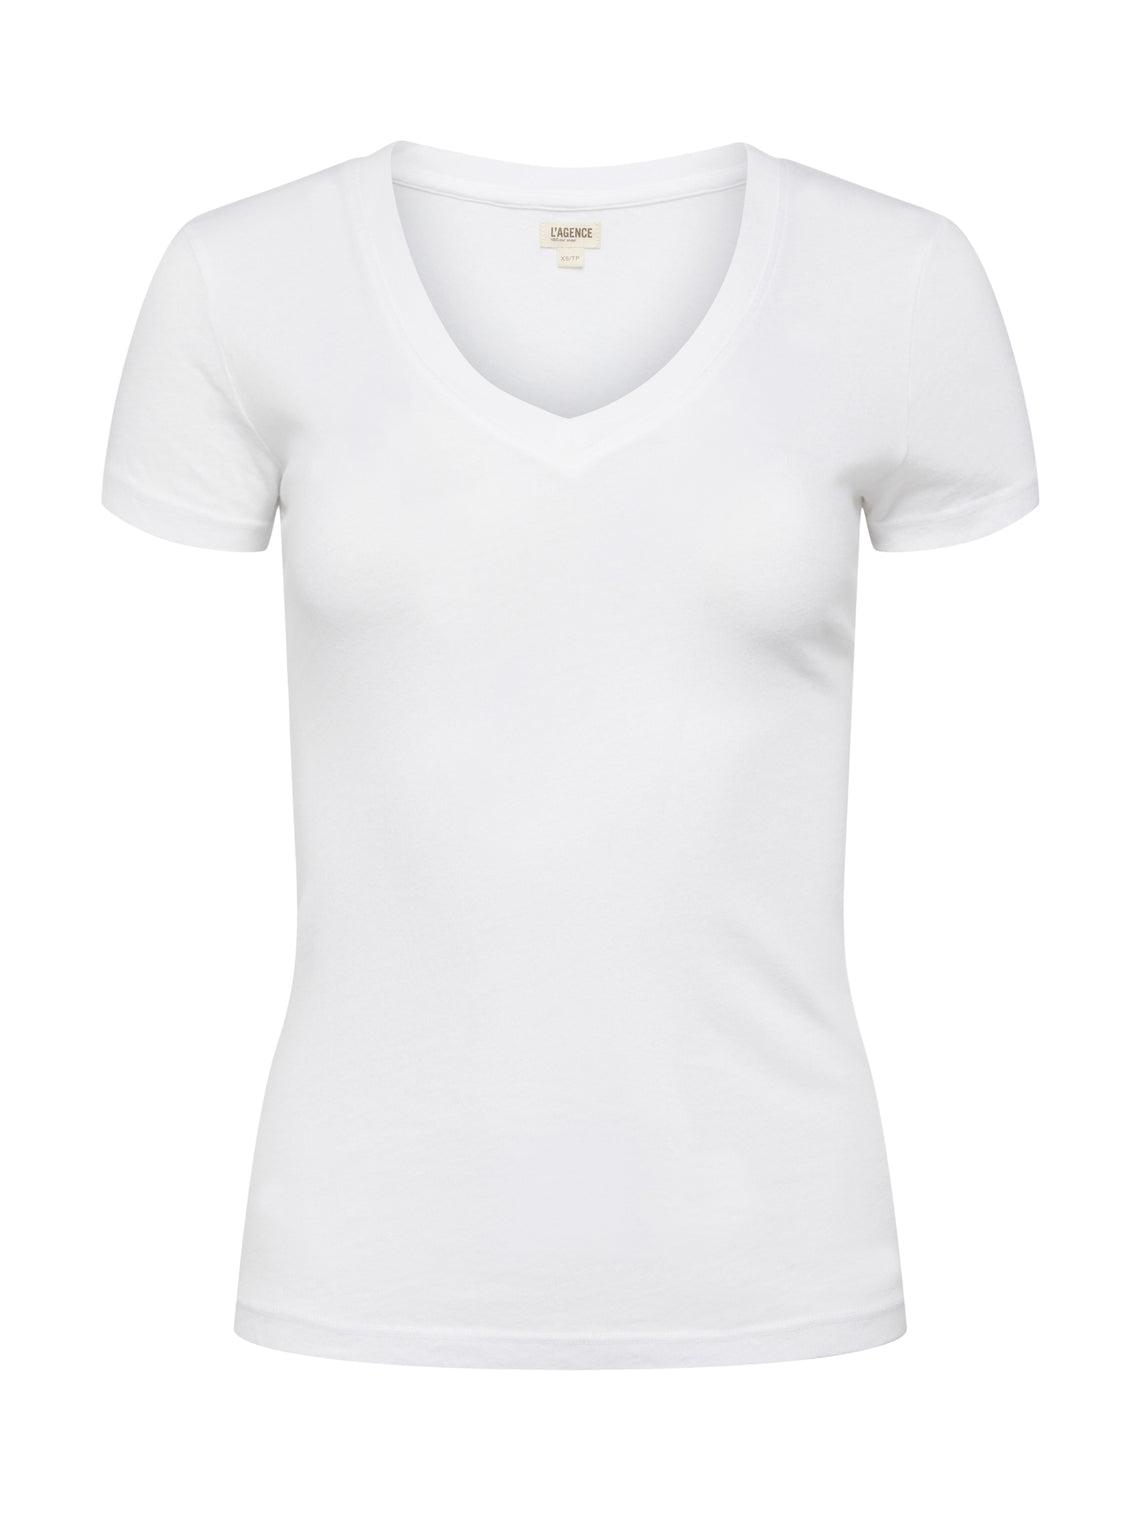 L'AGENCE Becca Tee In White